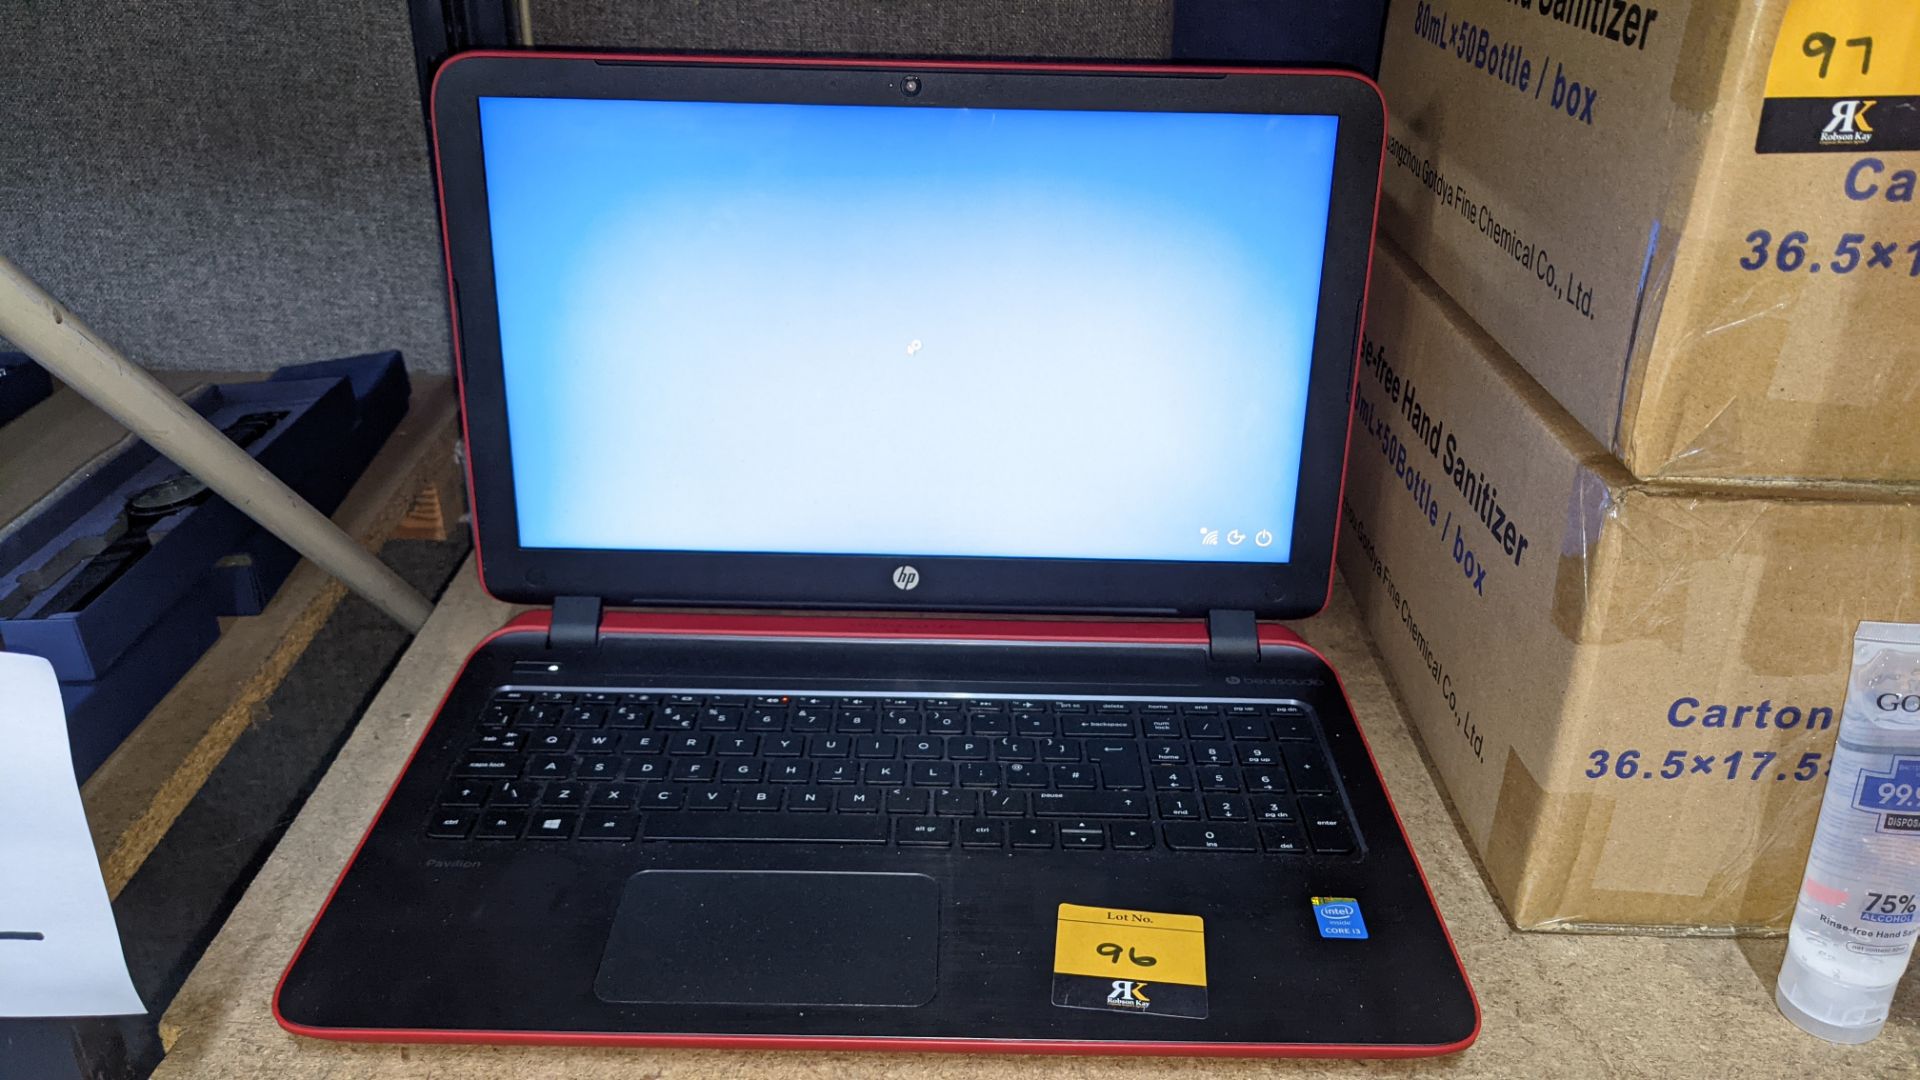 HP Protect Smart notebook computer with Intel Core i3-5010U processor@2.1GHz, 8Gb RAM, 180Gb hard dr - Image 8 of 8